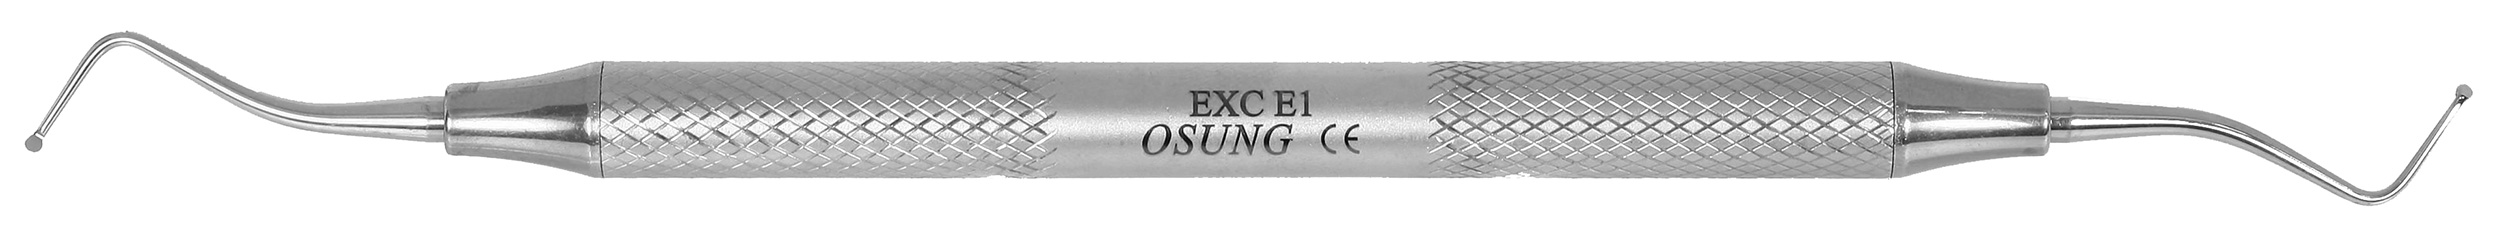 EXCE1